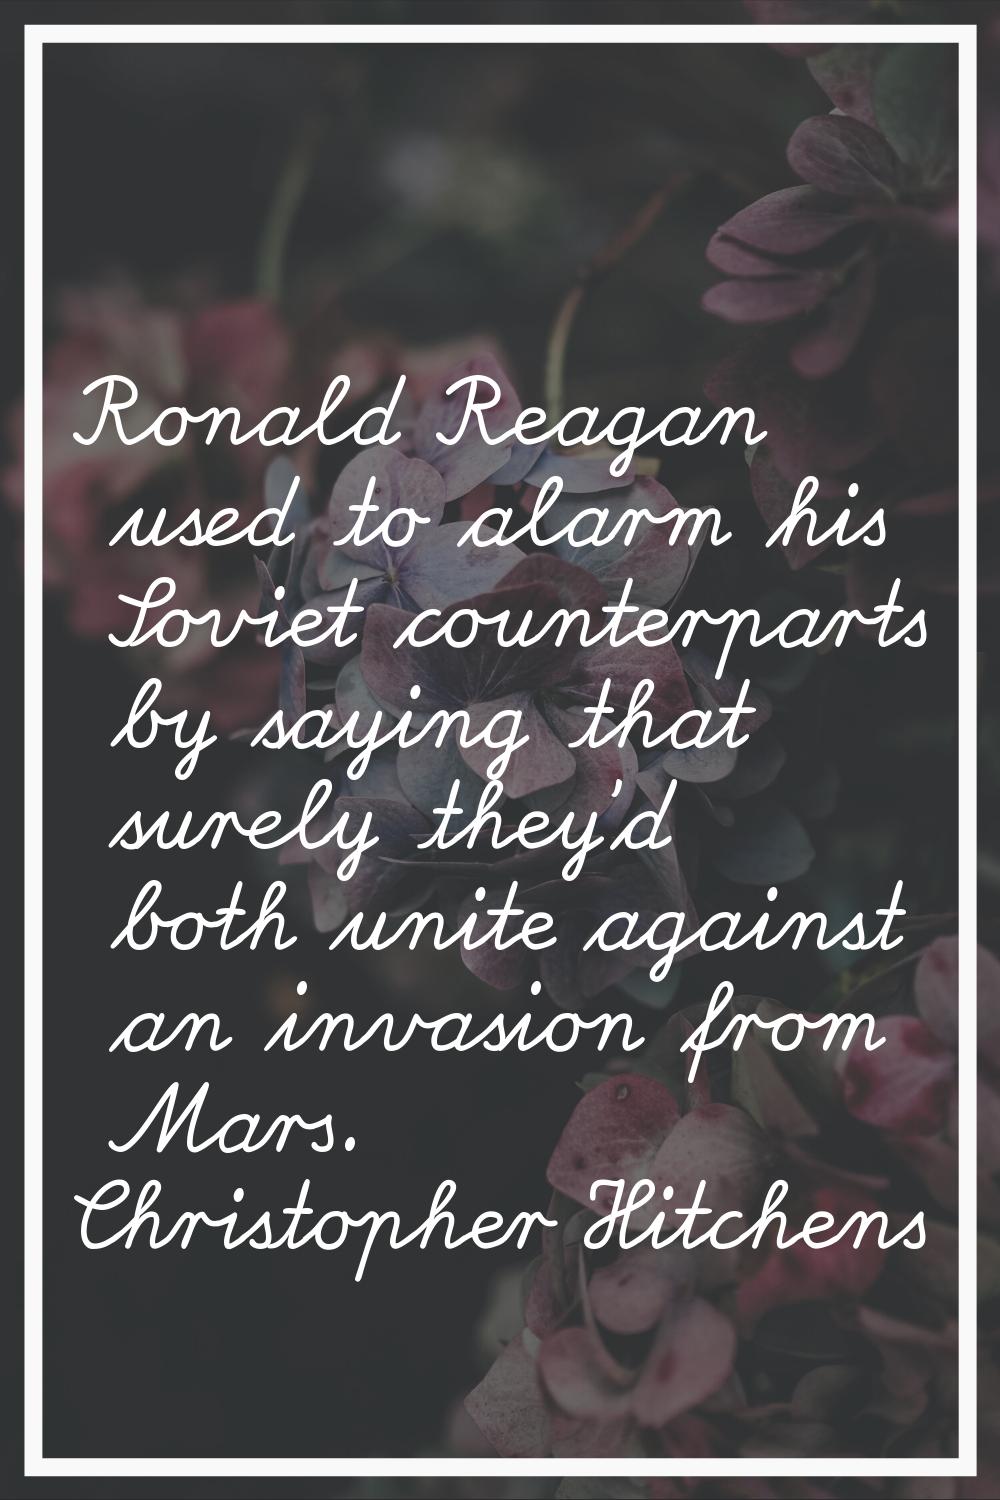 Ronald Reagan used to alarm his Soviet counterparts by saying that surely they'd both unite against